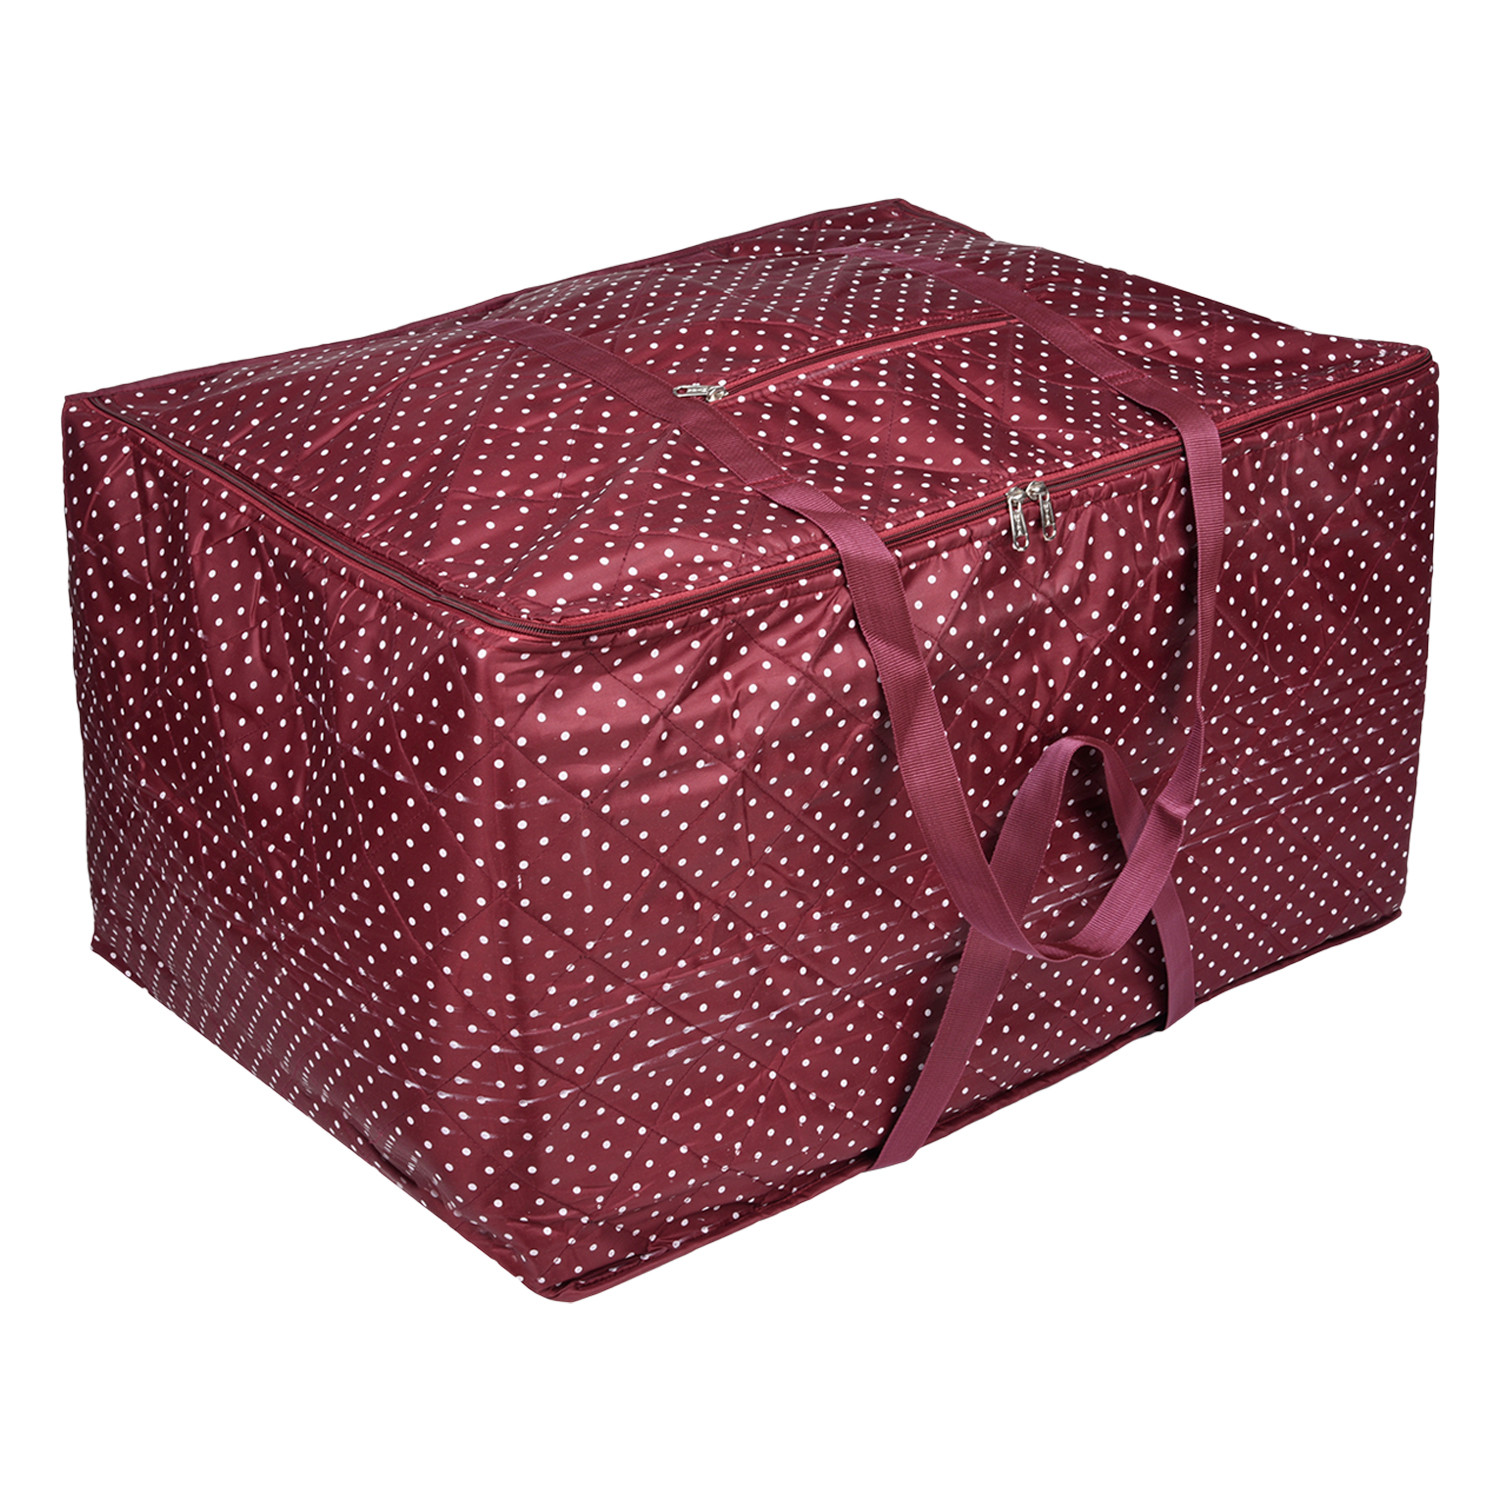 Kuber Industries Storage Bag | Polyester Travel Duffle Bag | Foldable Underbed Storage Bag | Dot Print Storage Bag For Clothes with Handle | Large | Maroon